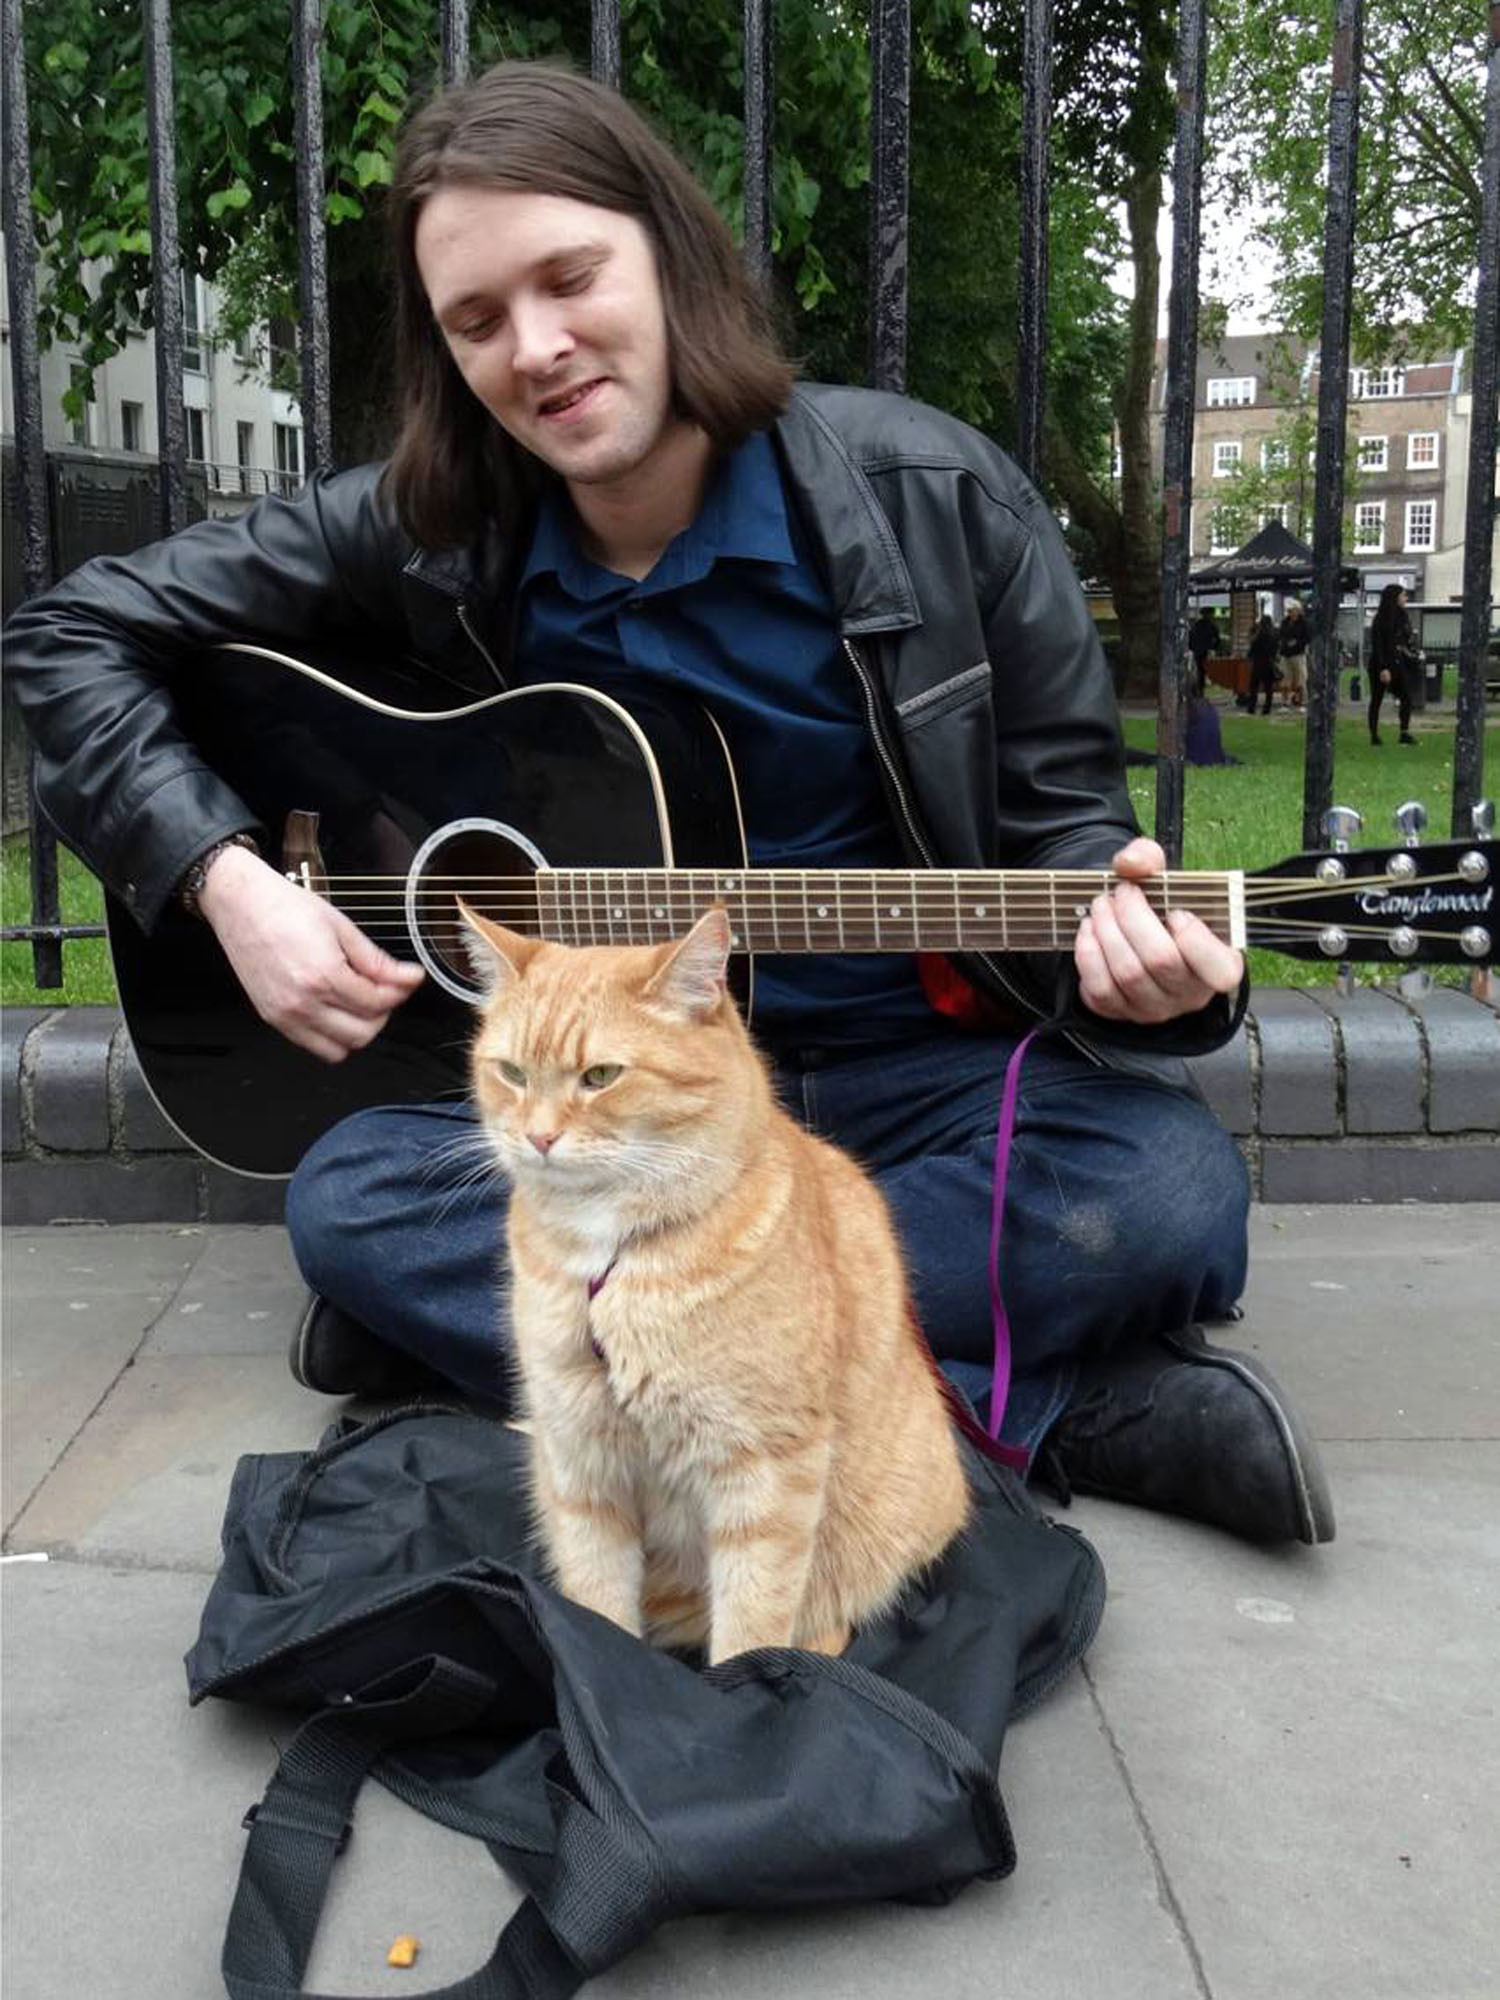 How a feral cat helped a homeless man turn his life around